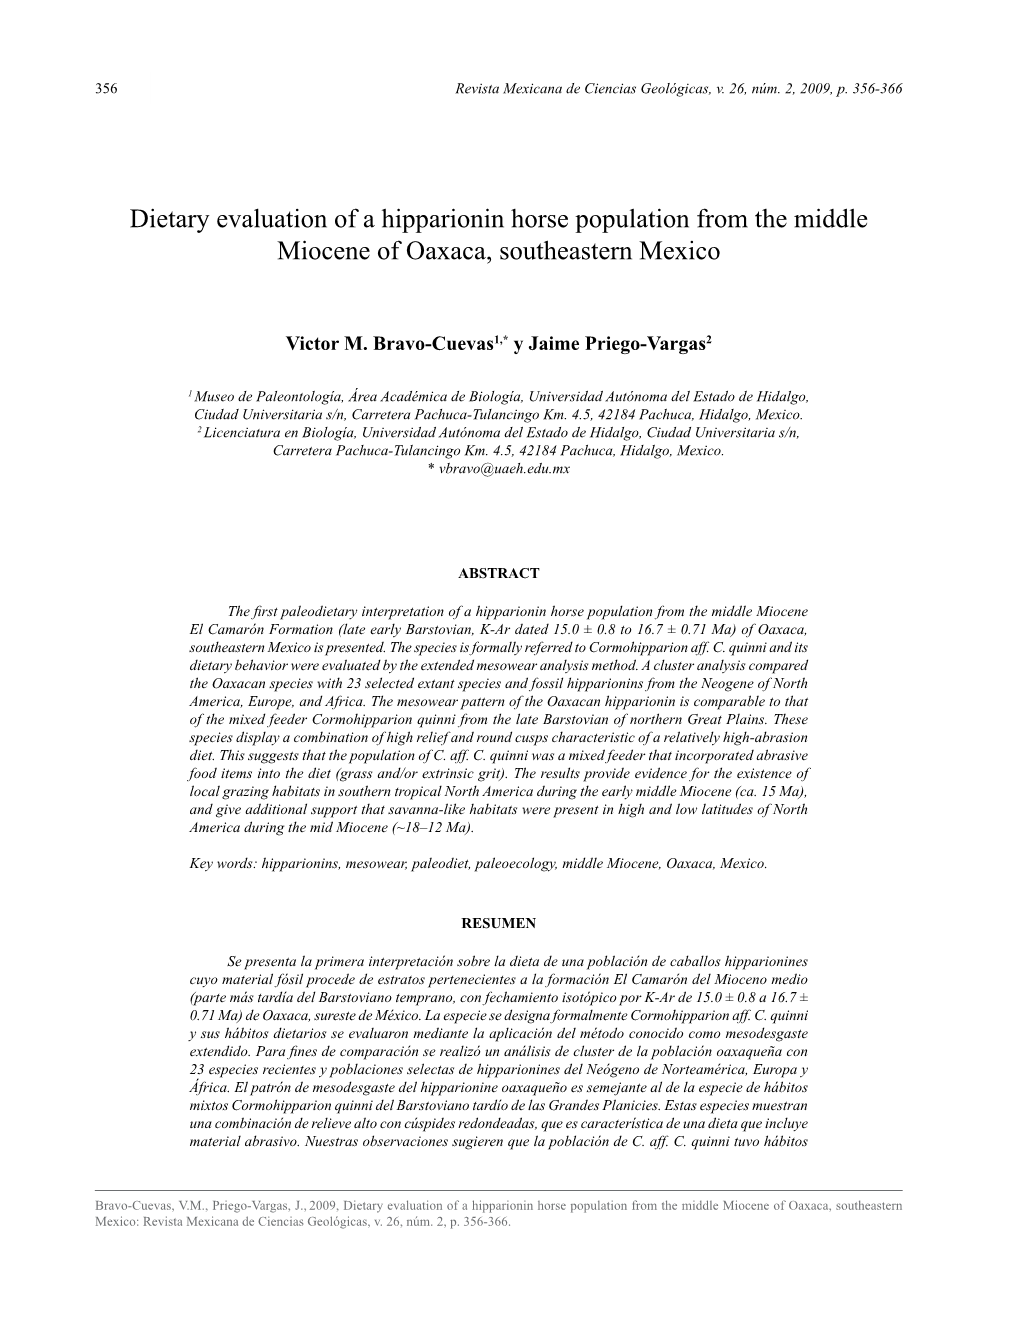 Dietary Evaluation of a Hipparionin Horse Population from the Middle Miocene of Oaxaca, Southeastern Mexico